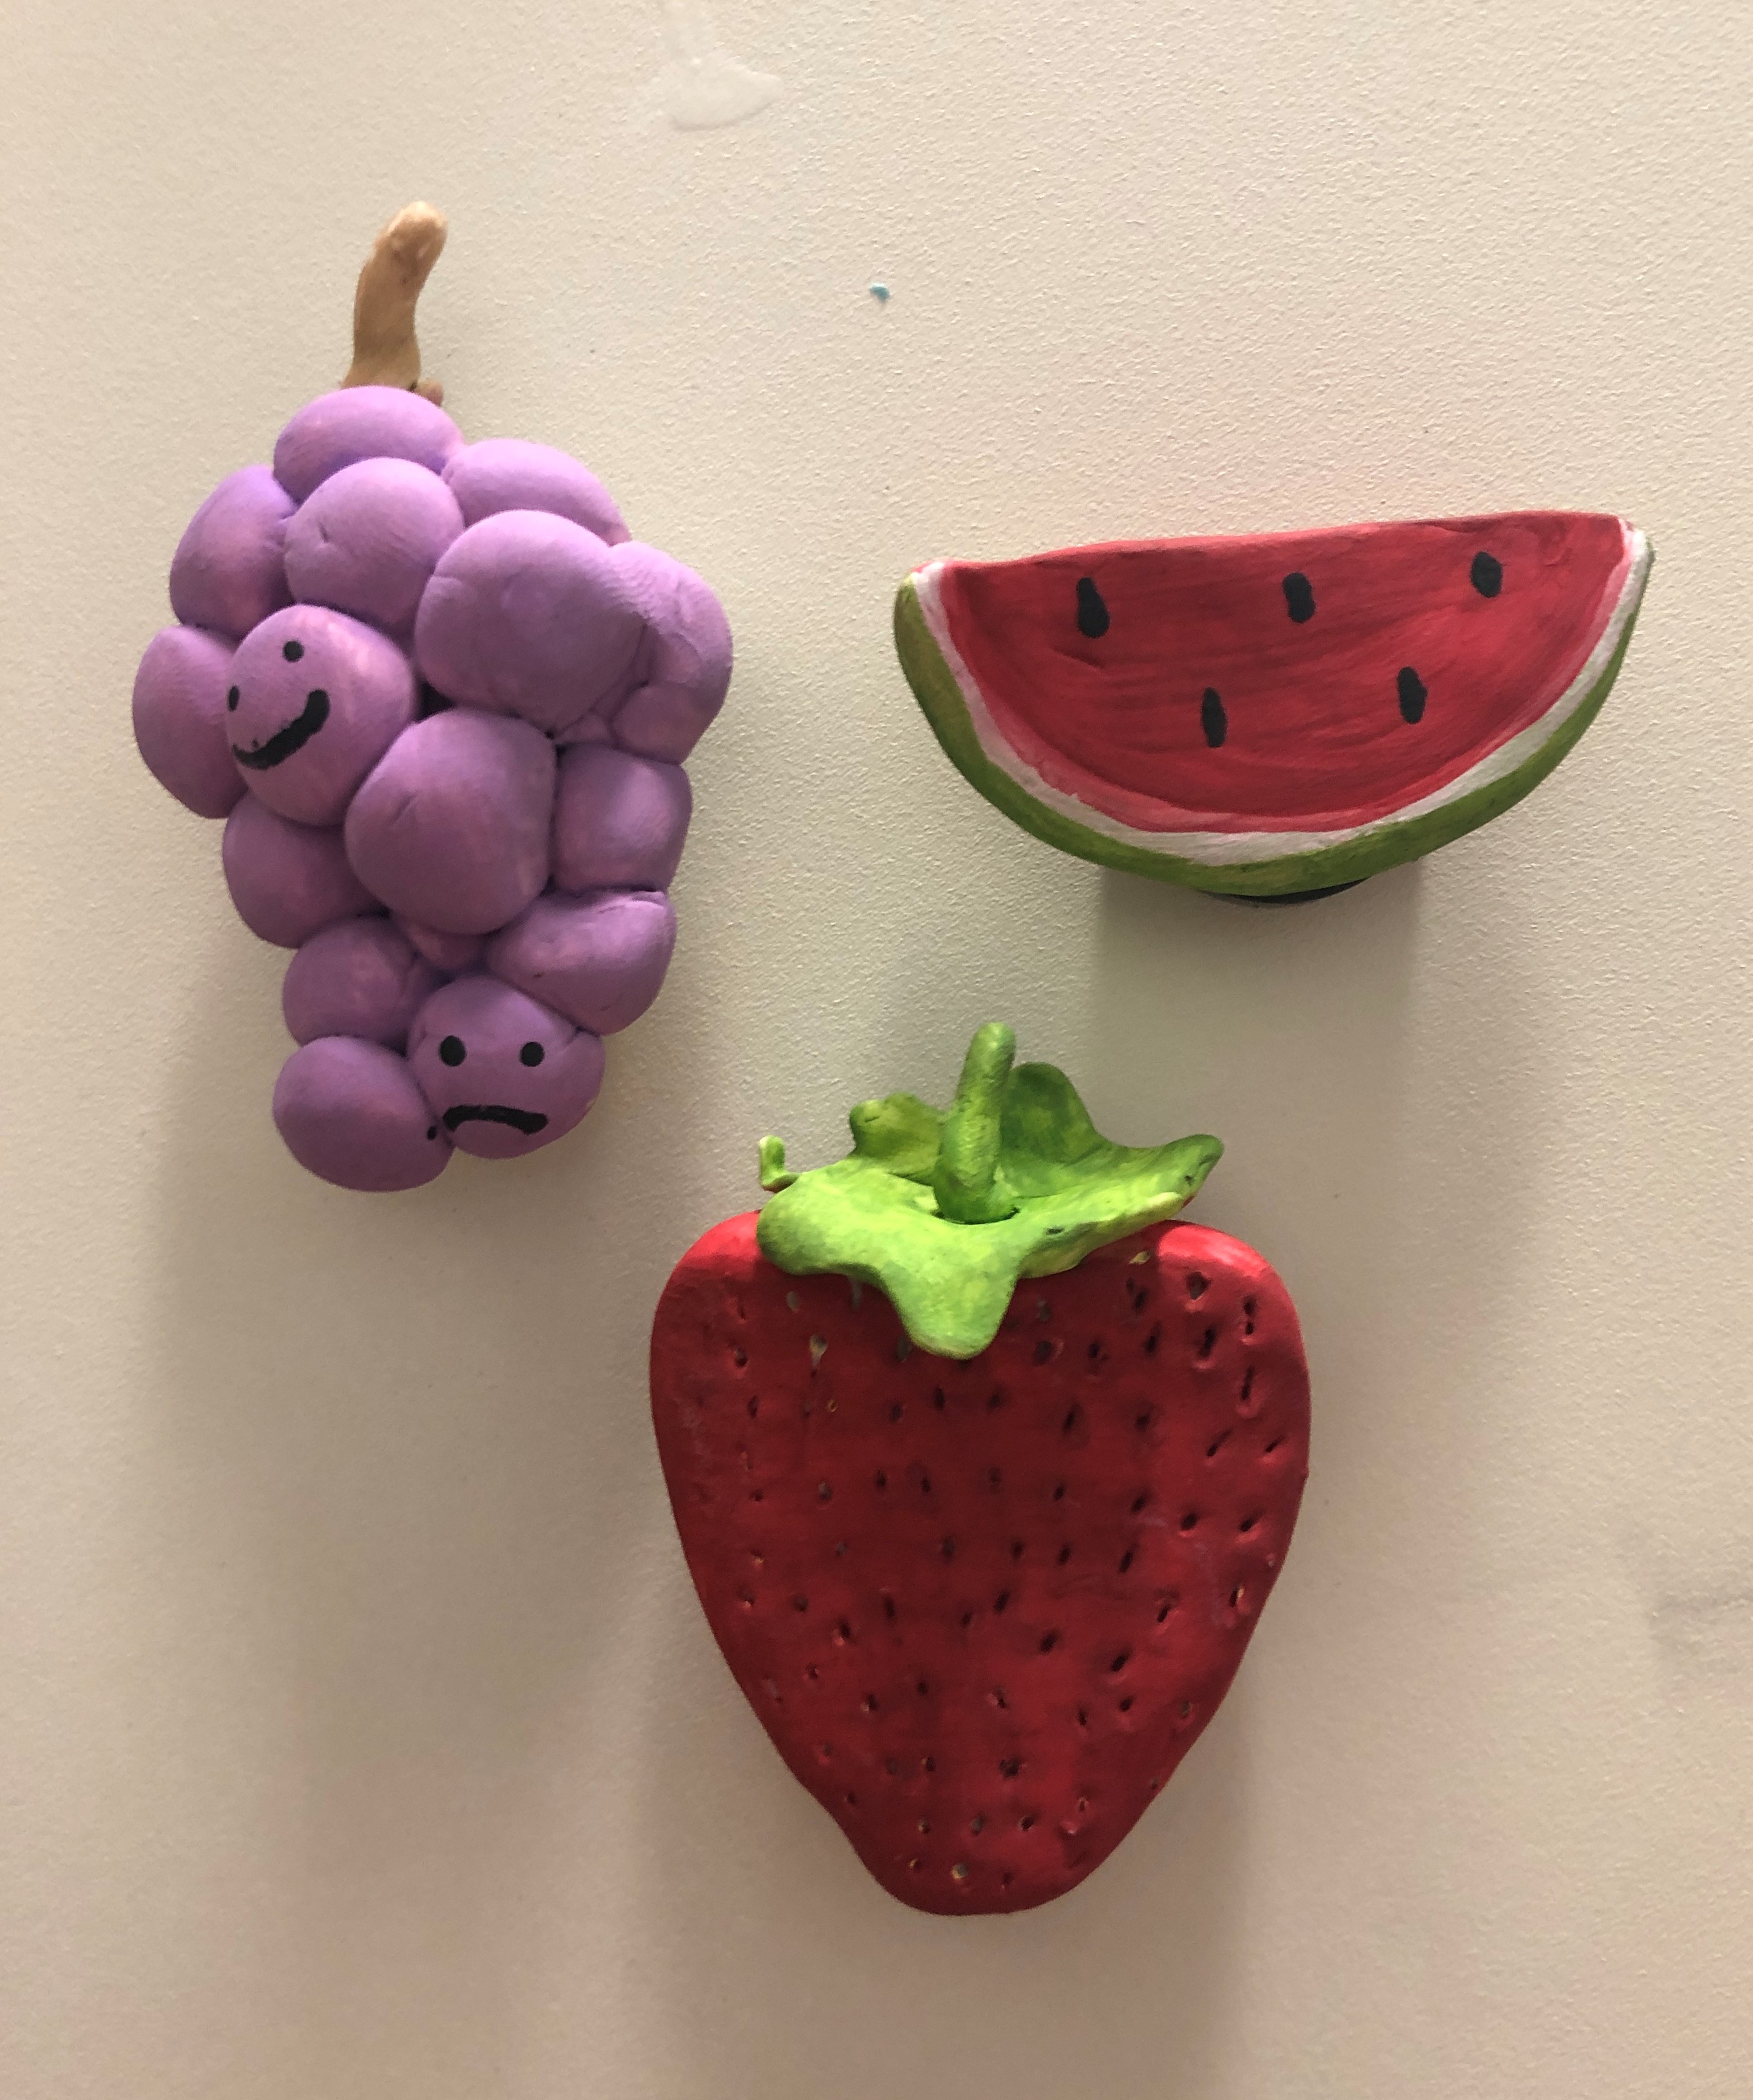 Strawberry, watermelon, and grapes made of clay